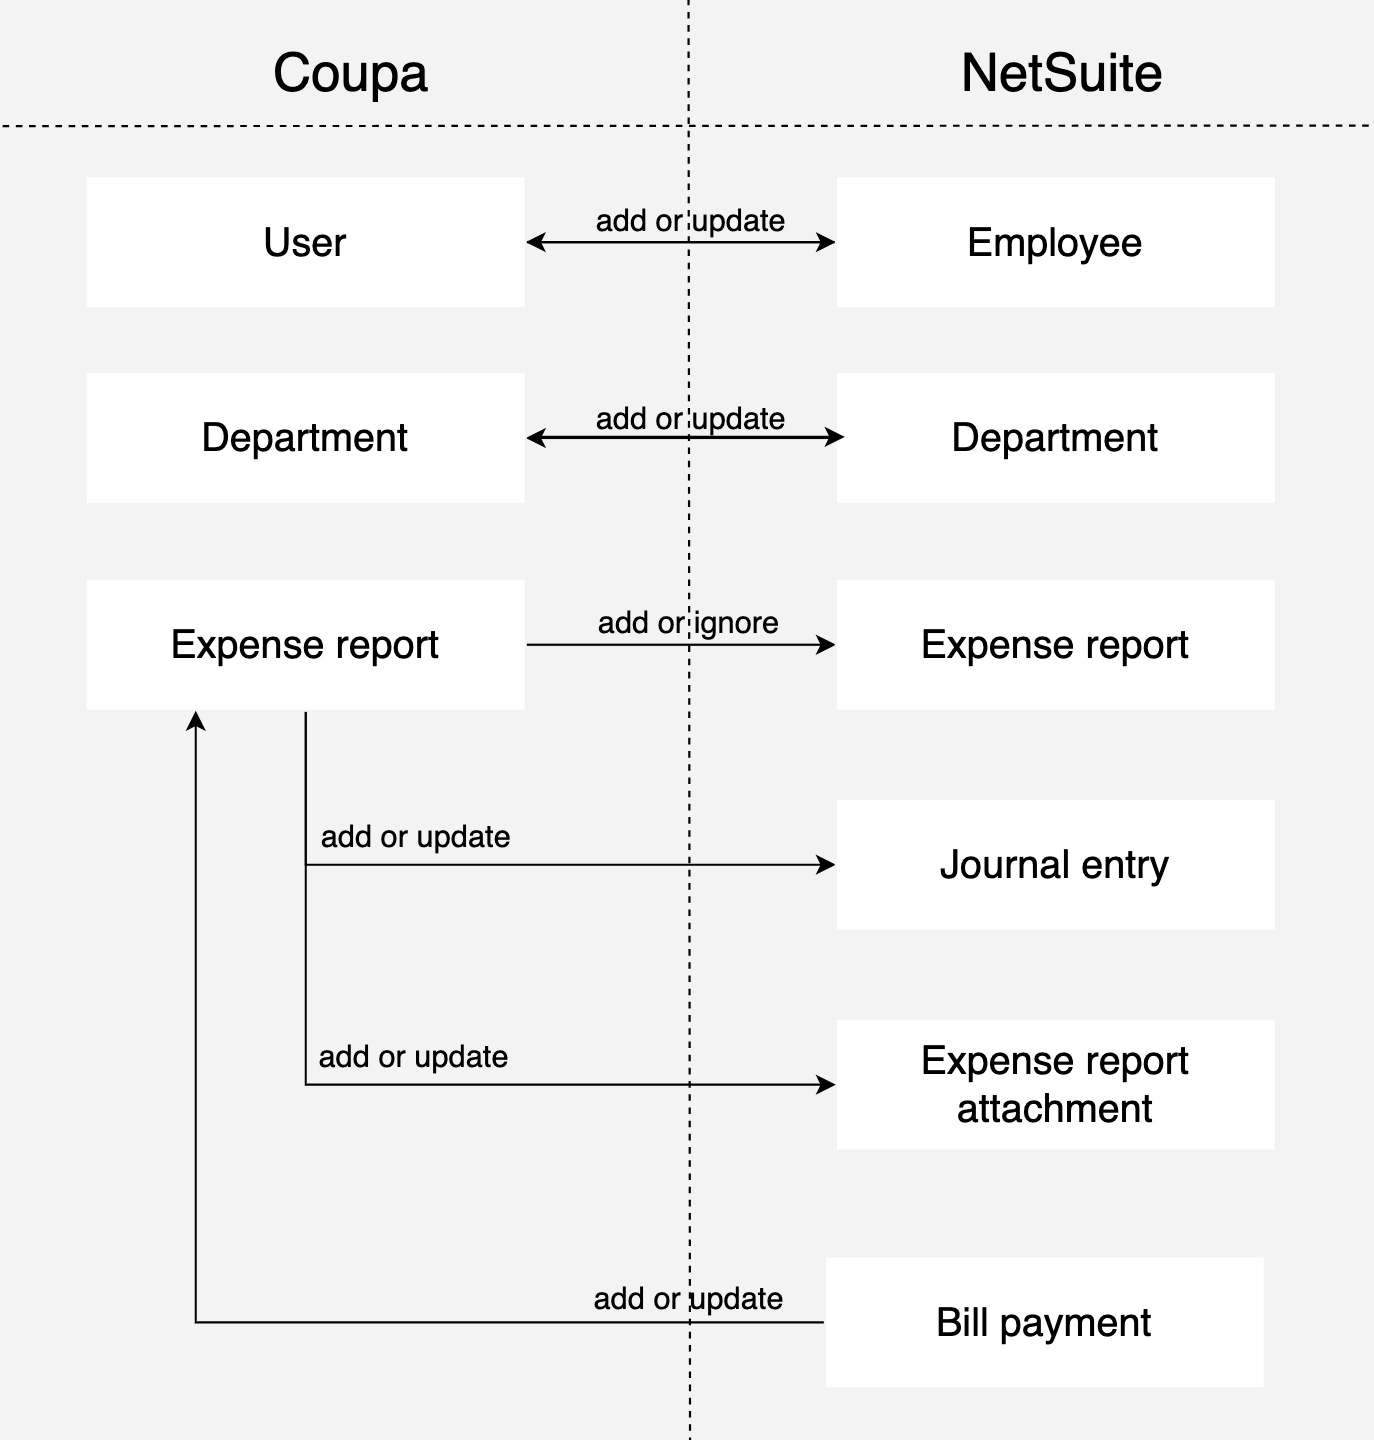 Coupa_NS_overview.jpg